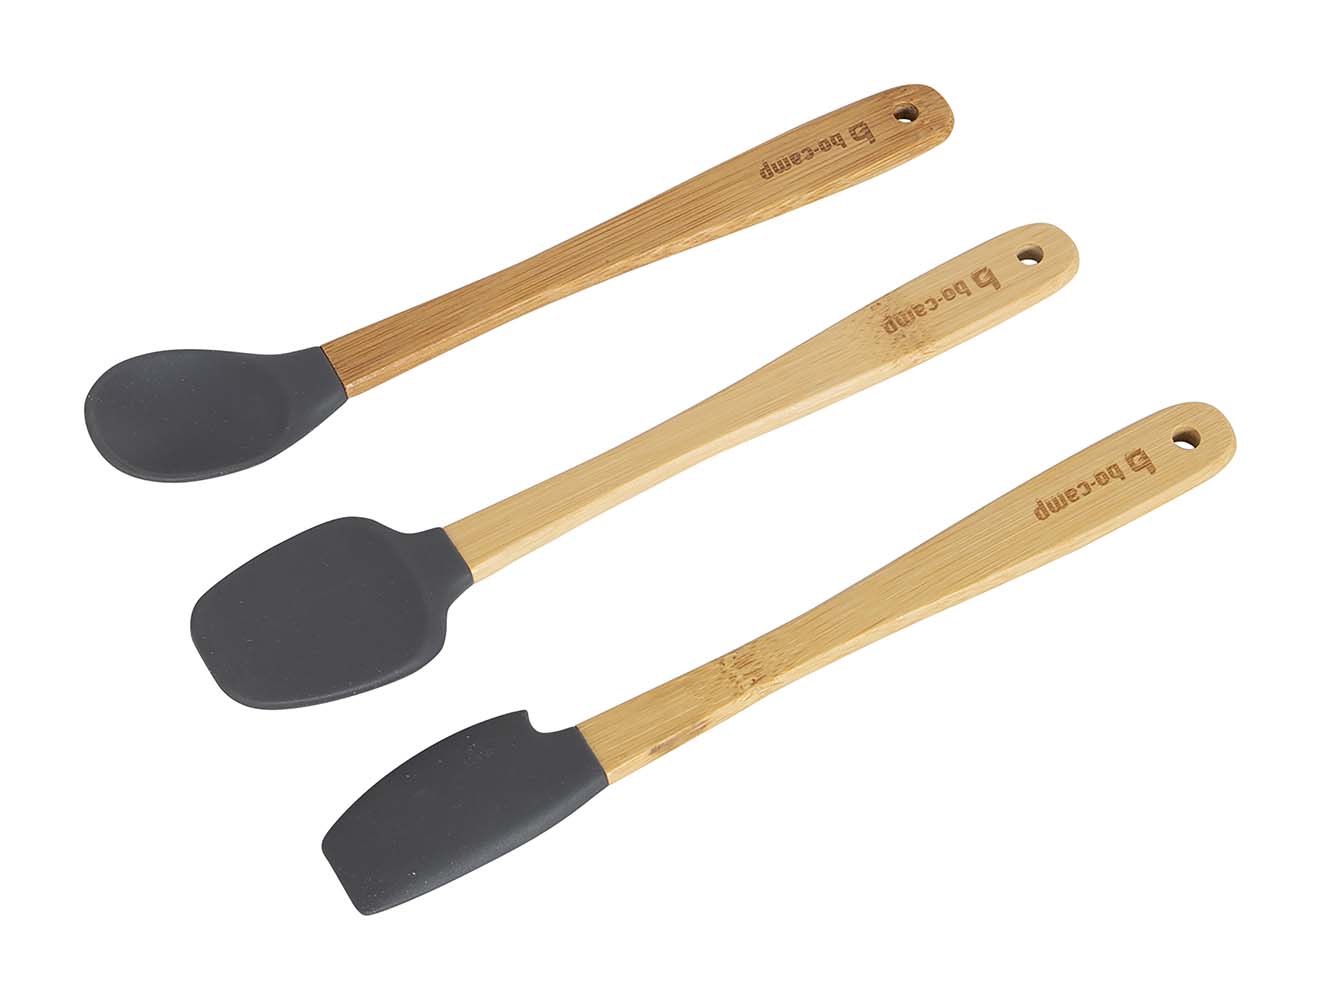 6102194 A 3-piece utensil set with bamboo handle and silicone tip. The kitchen utensils are light in weight, dishwasher safe and heat-resistant up to 200°C. The set consists of a spatula, scraper and serving spoon.